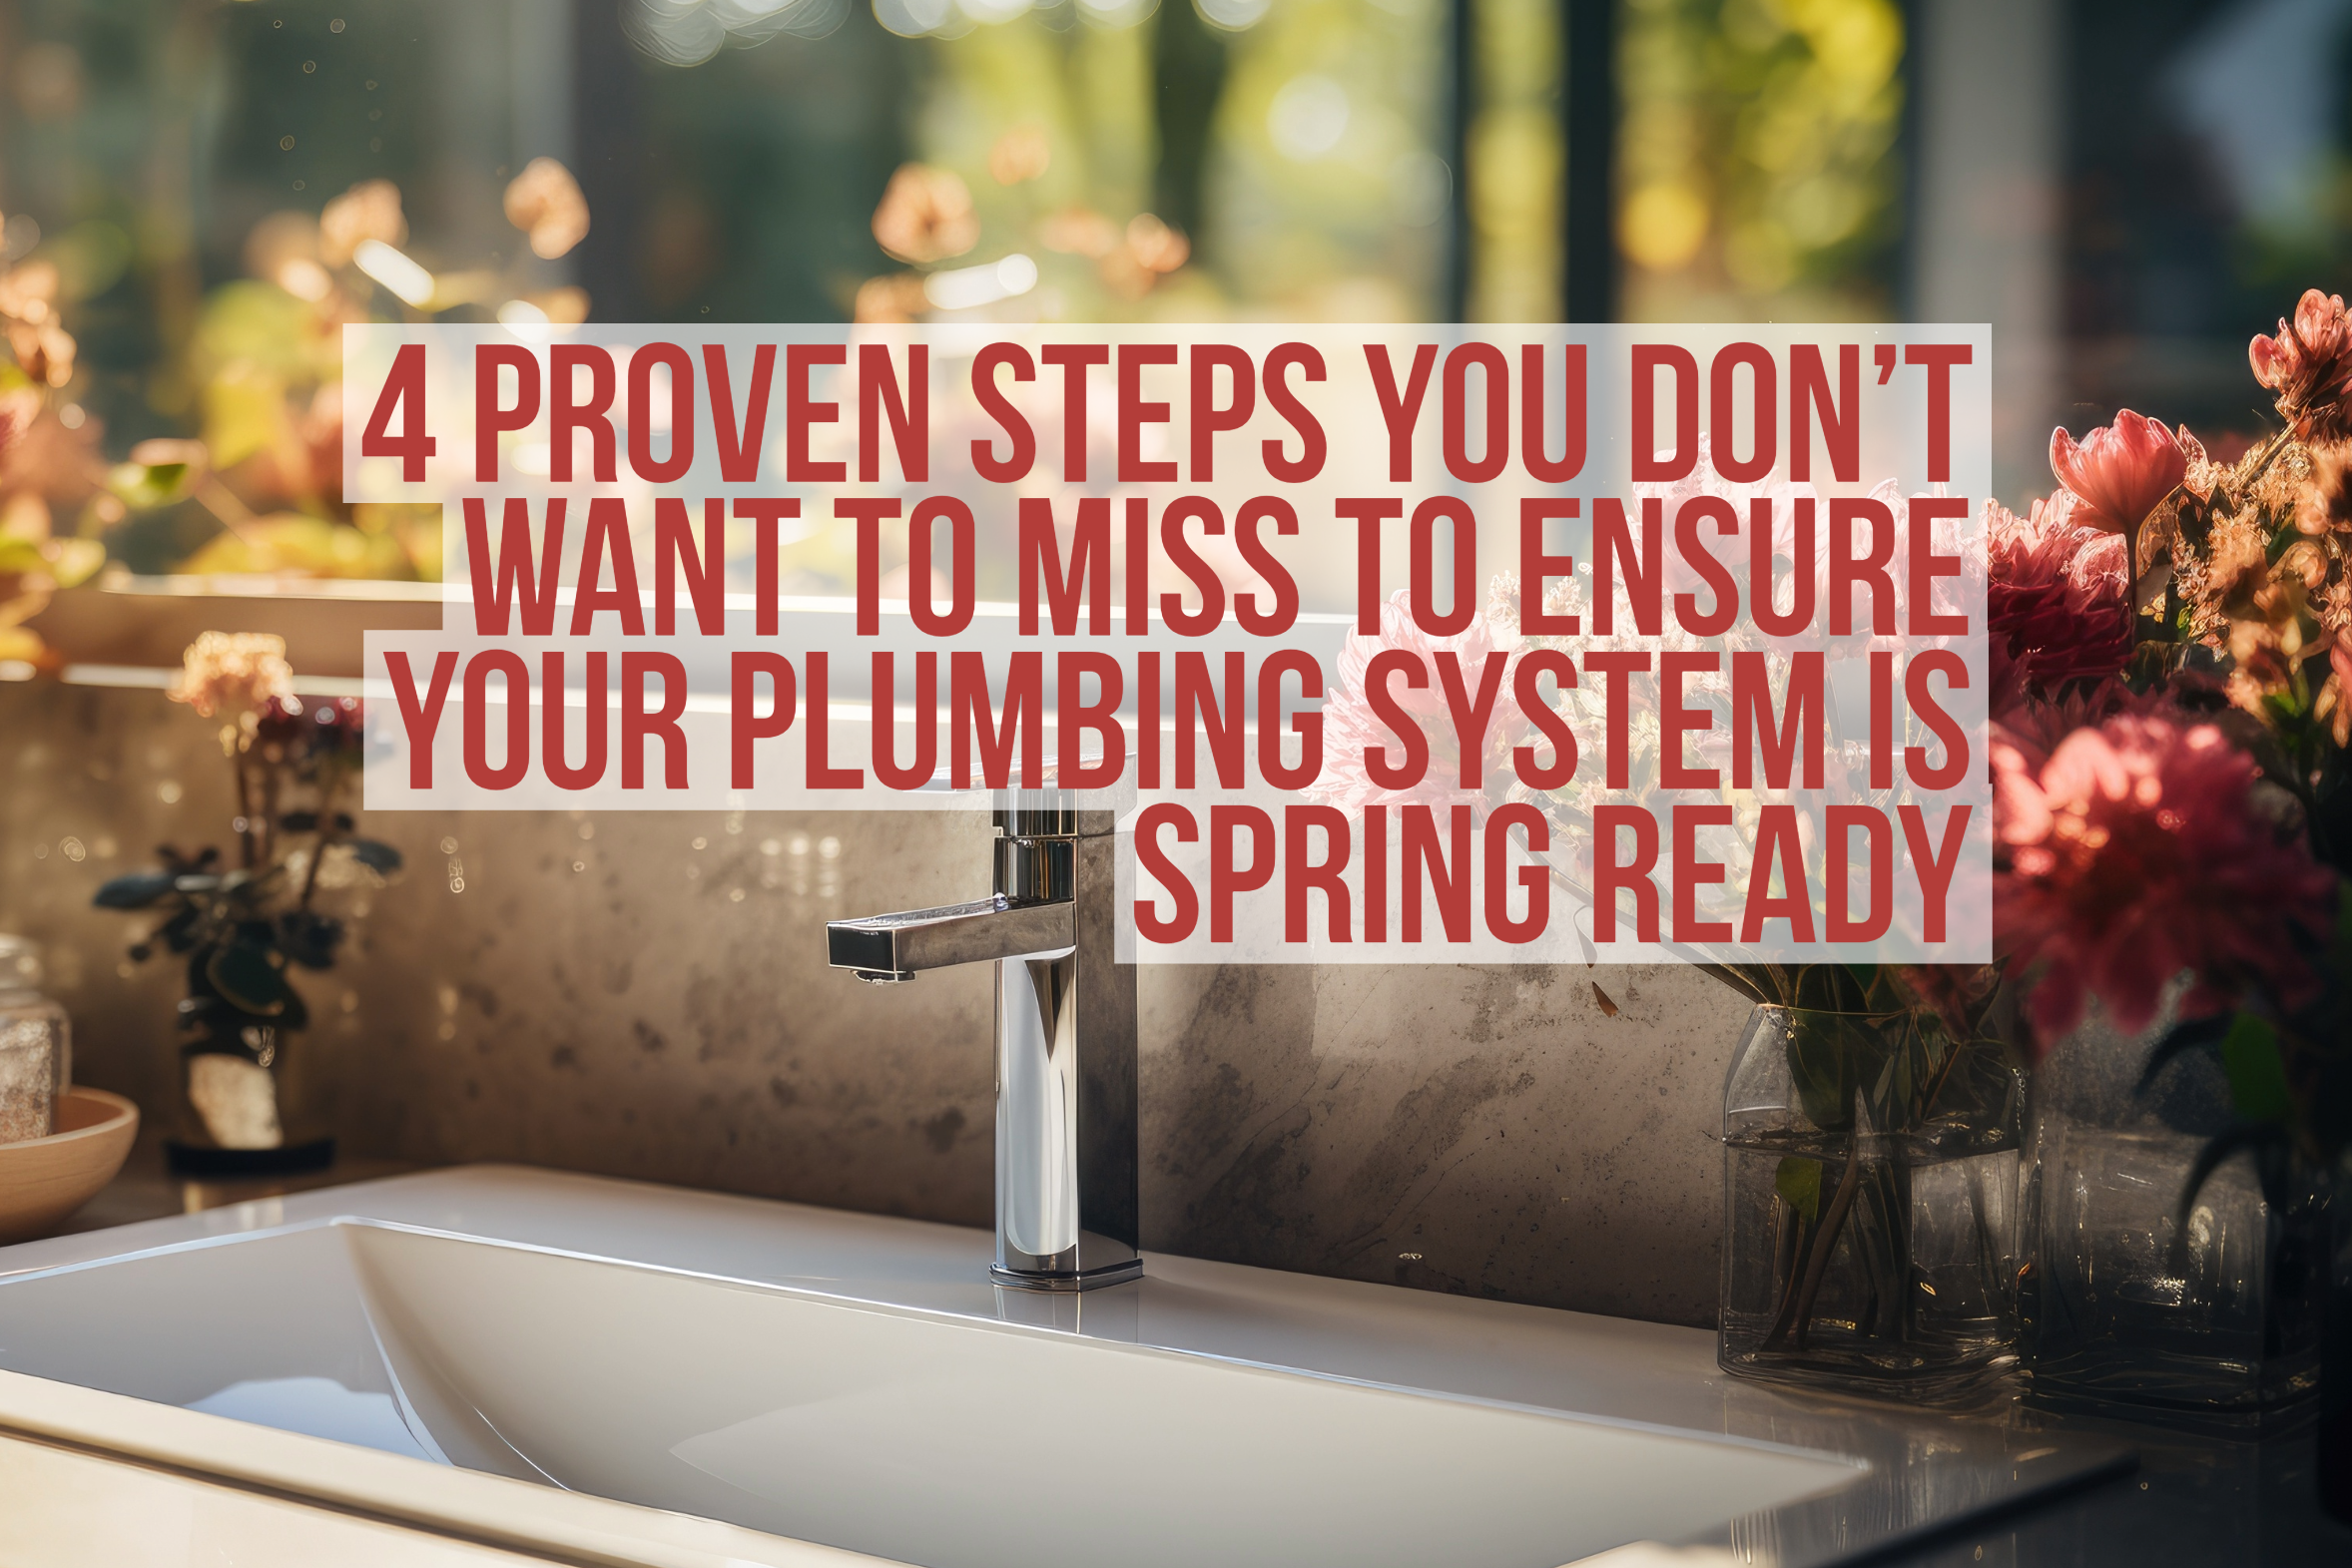 Spring plumbing tips to get your plumbing system spring-ready.